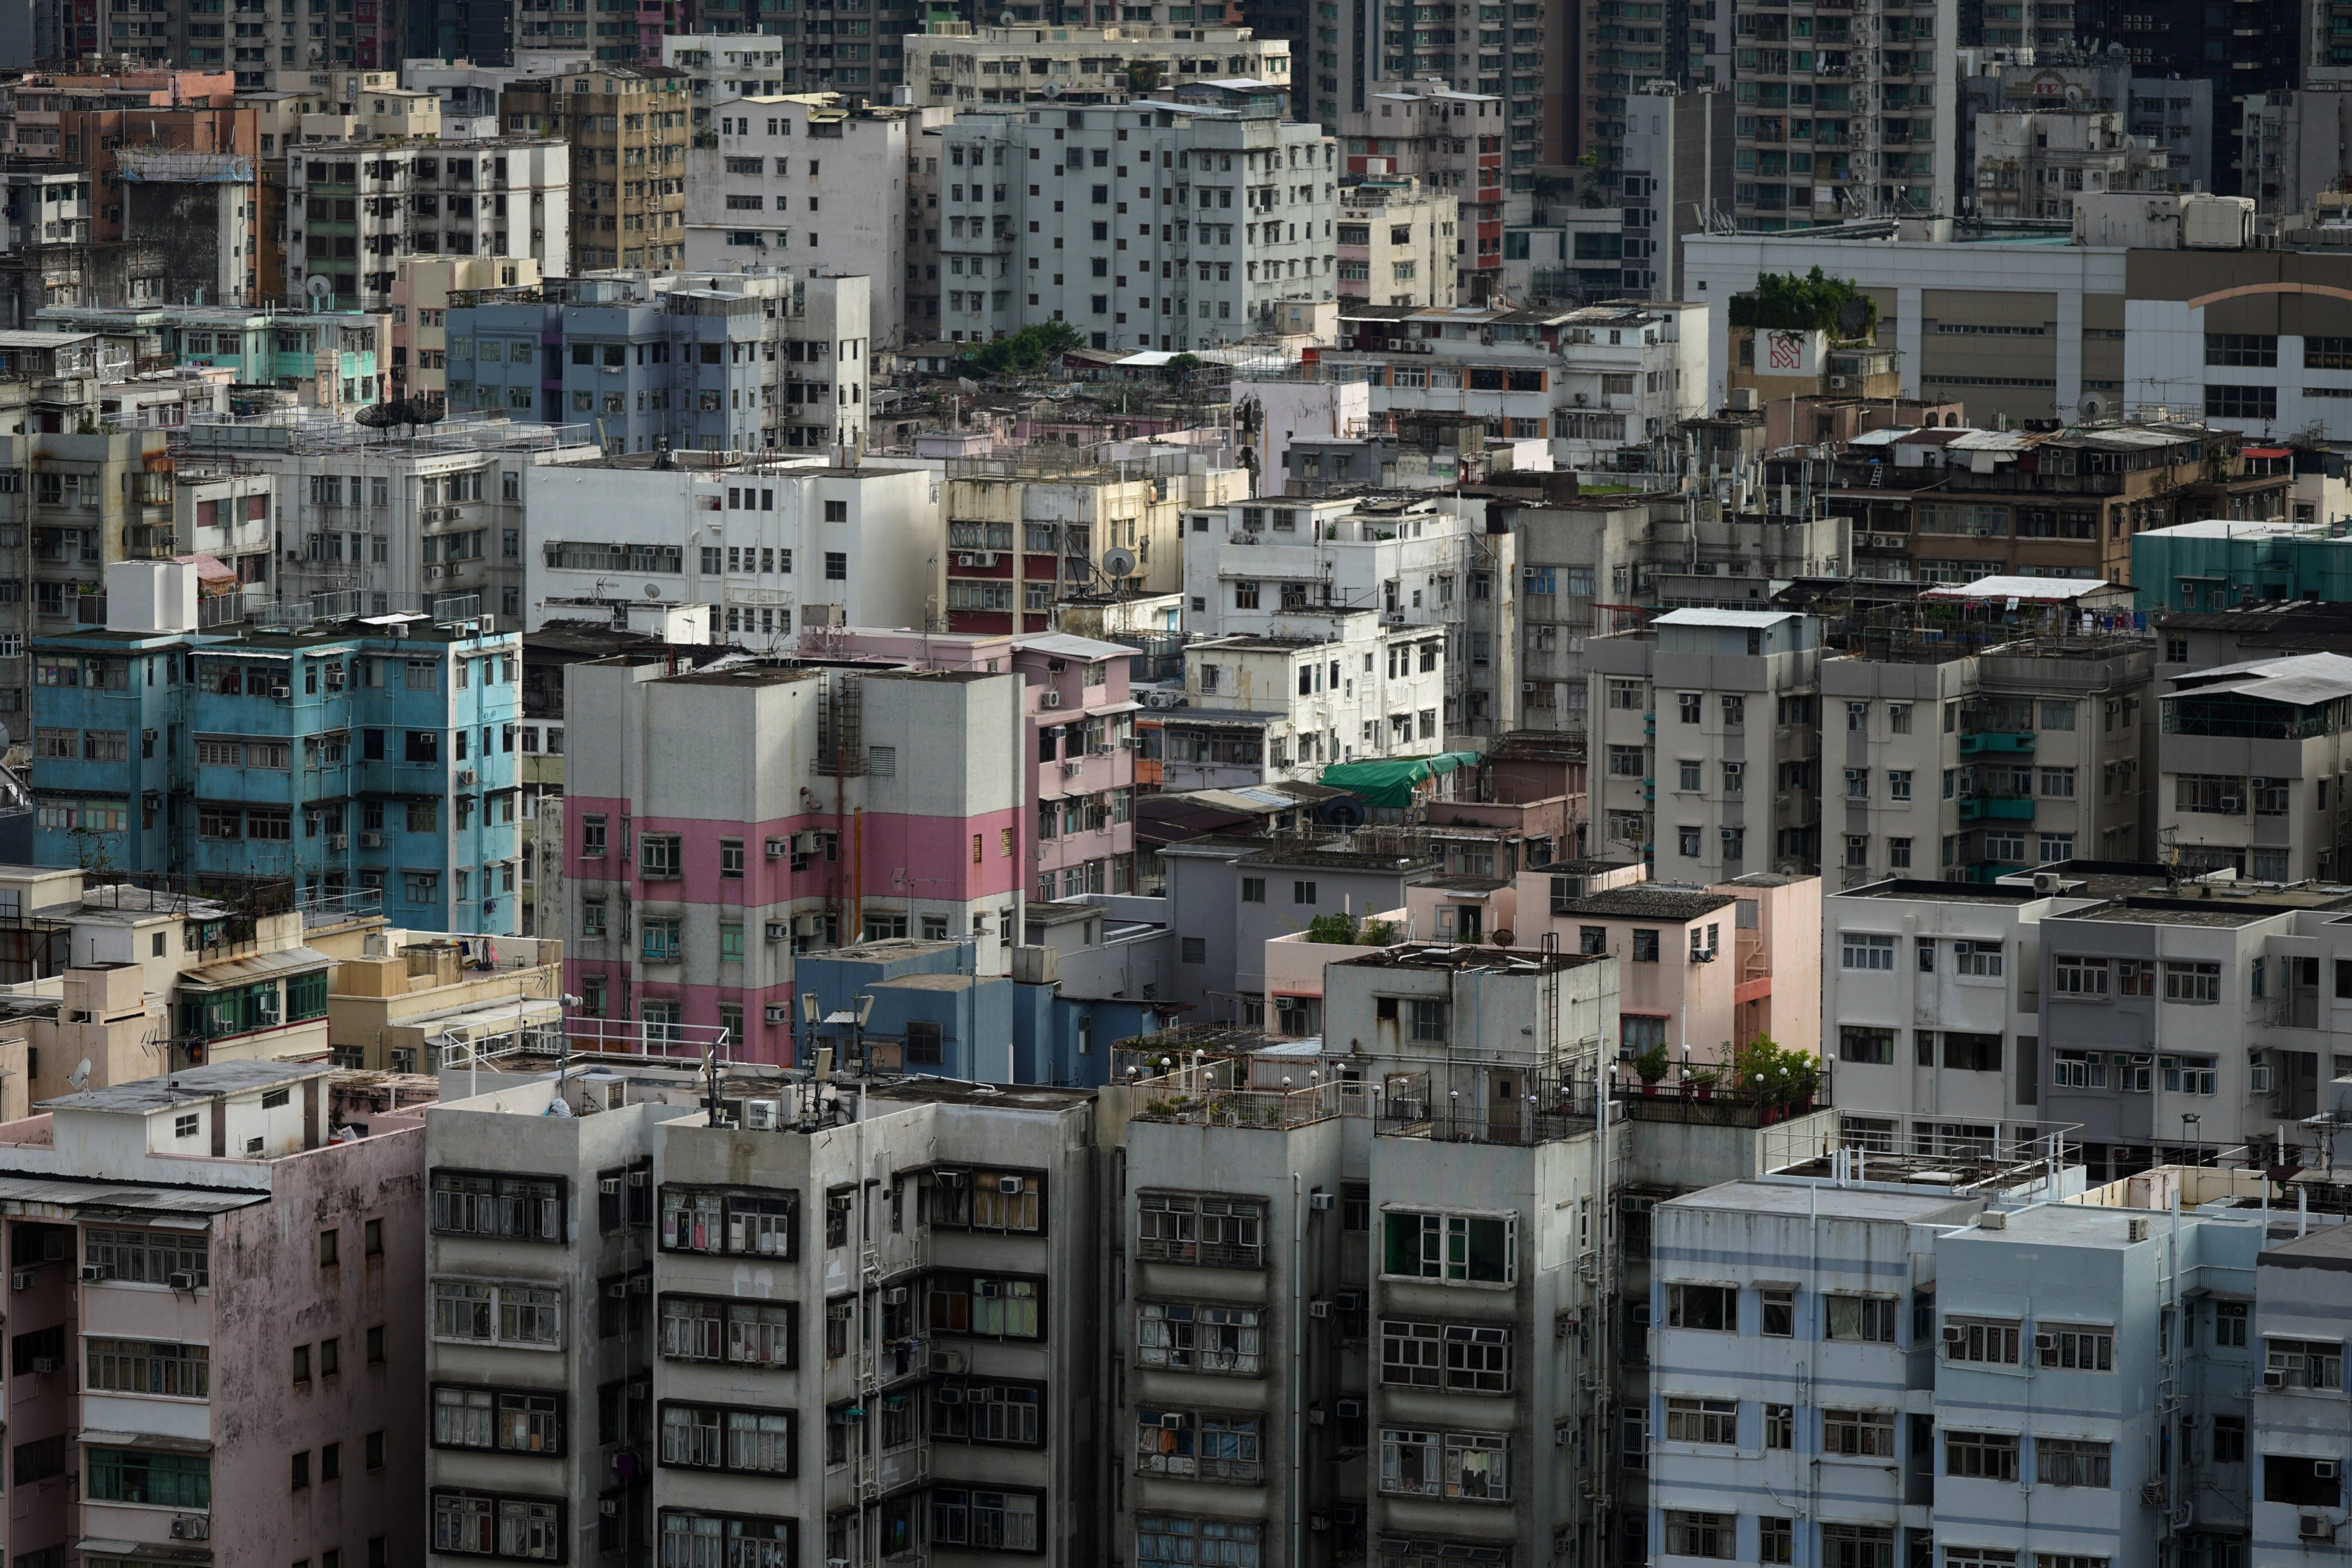 Old building are clustered together in West Kowloon in September 2020. Rising housing prices have pushed many Hongkongers into apartments subdivided into cramped living spaces. Photo: Sam Tsang